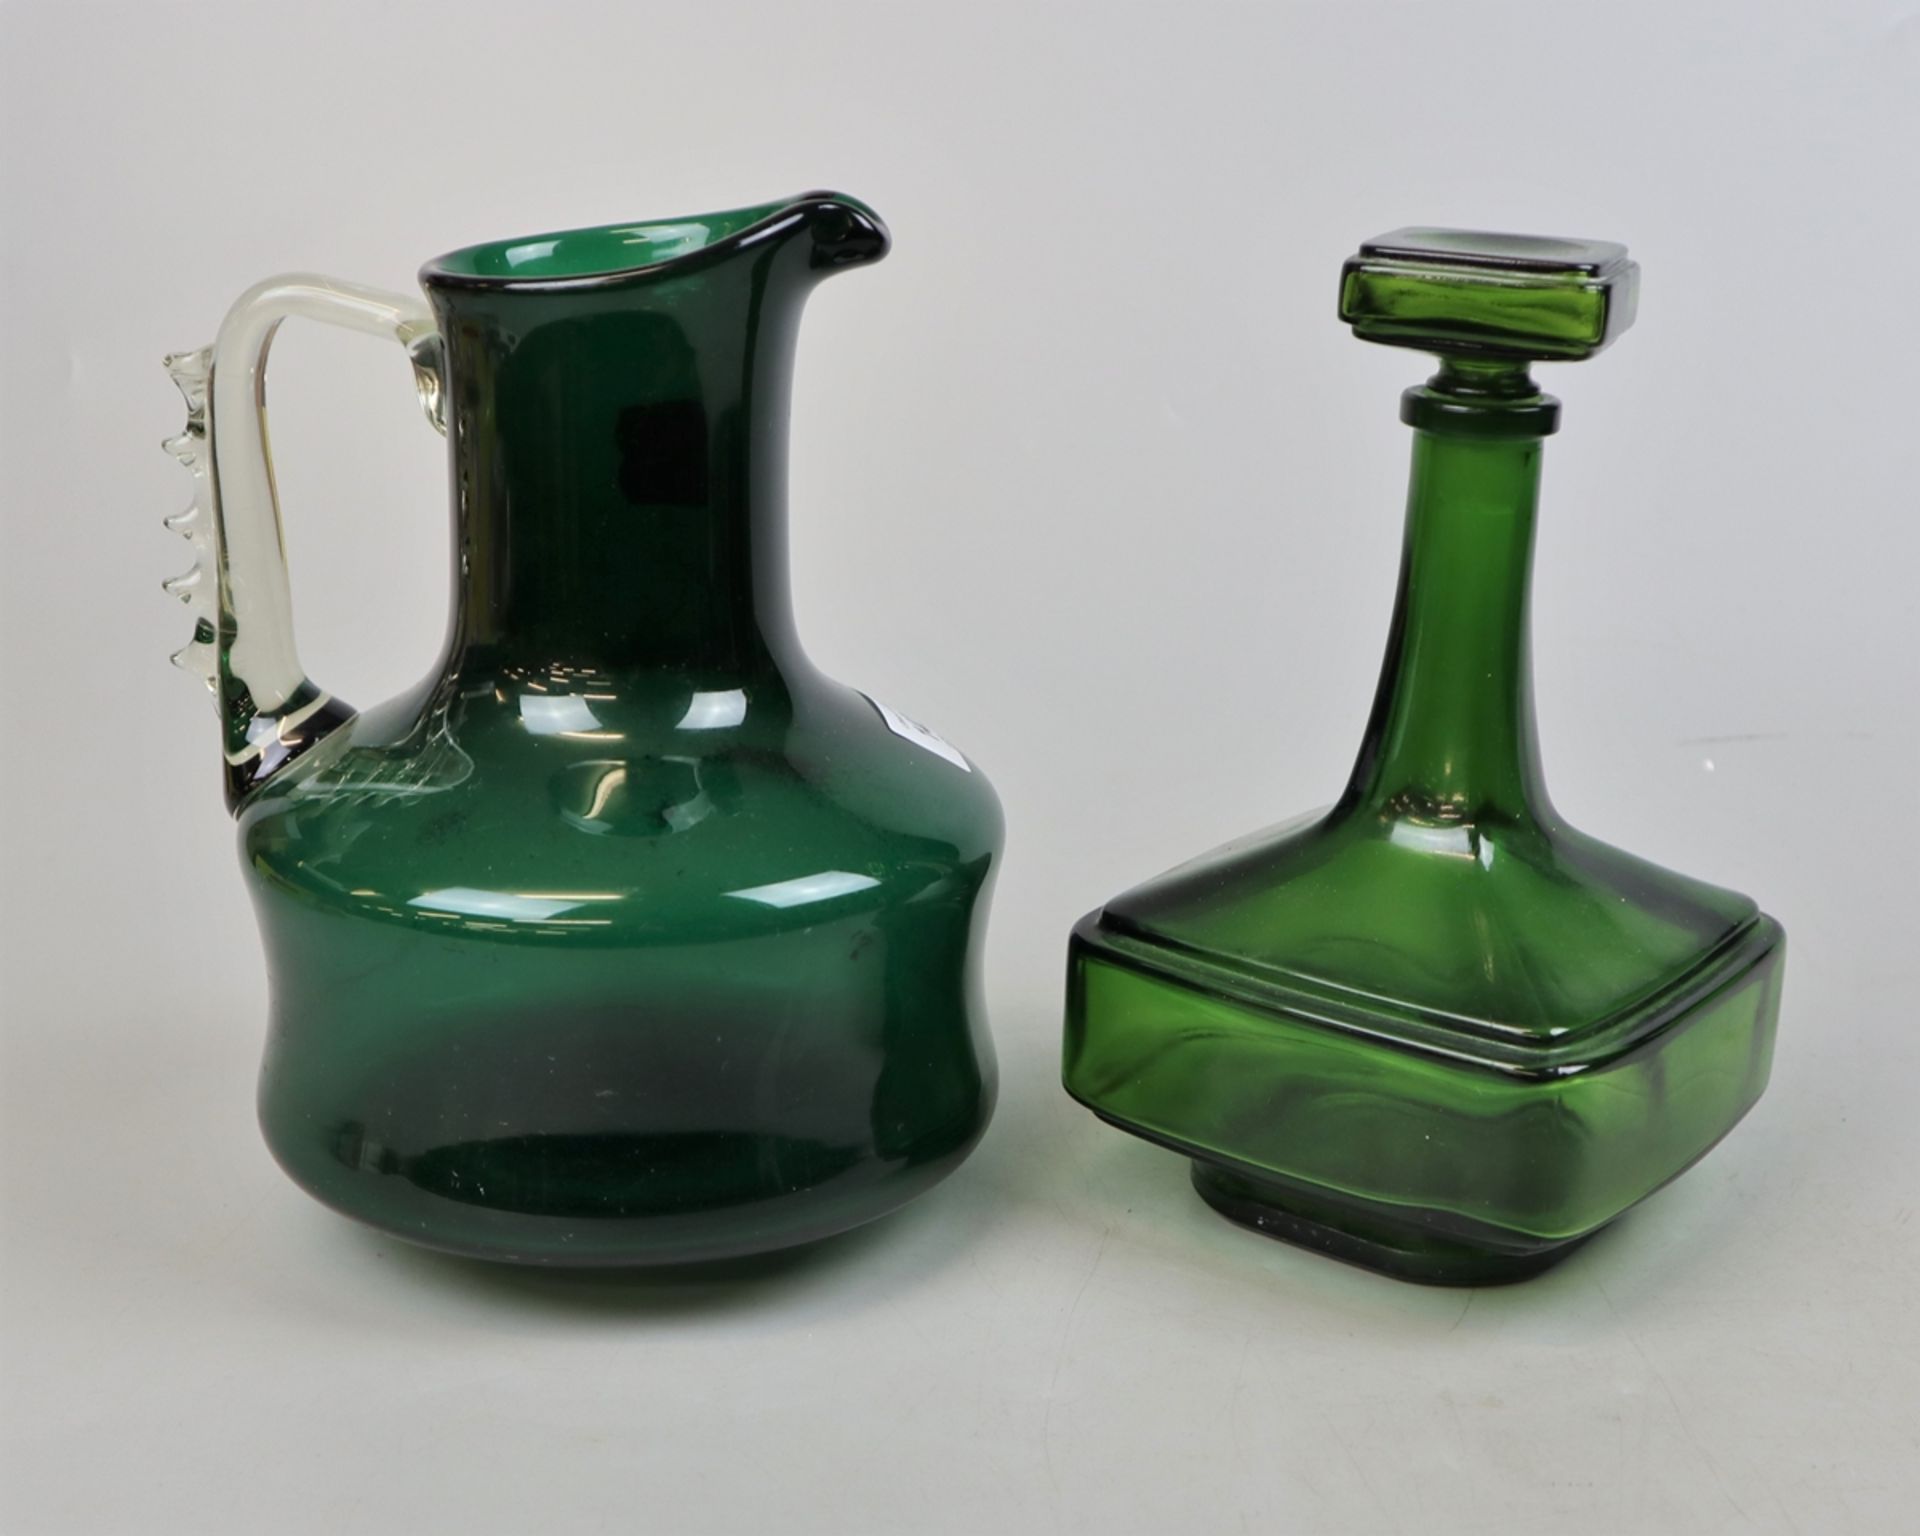 Green glass Murano style jug together with green glass decanter